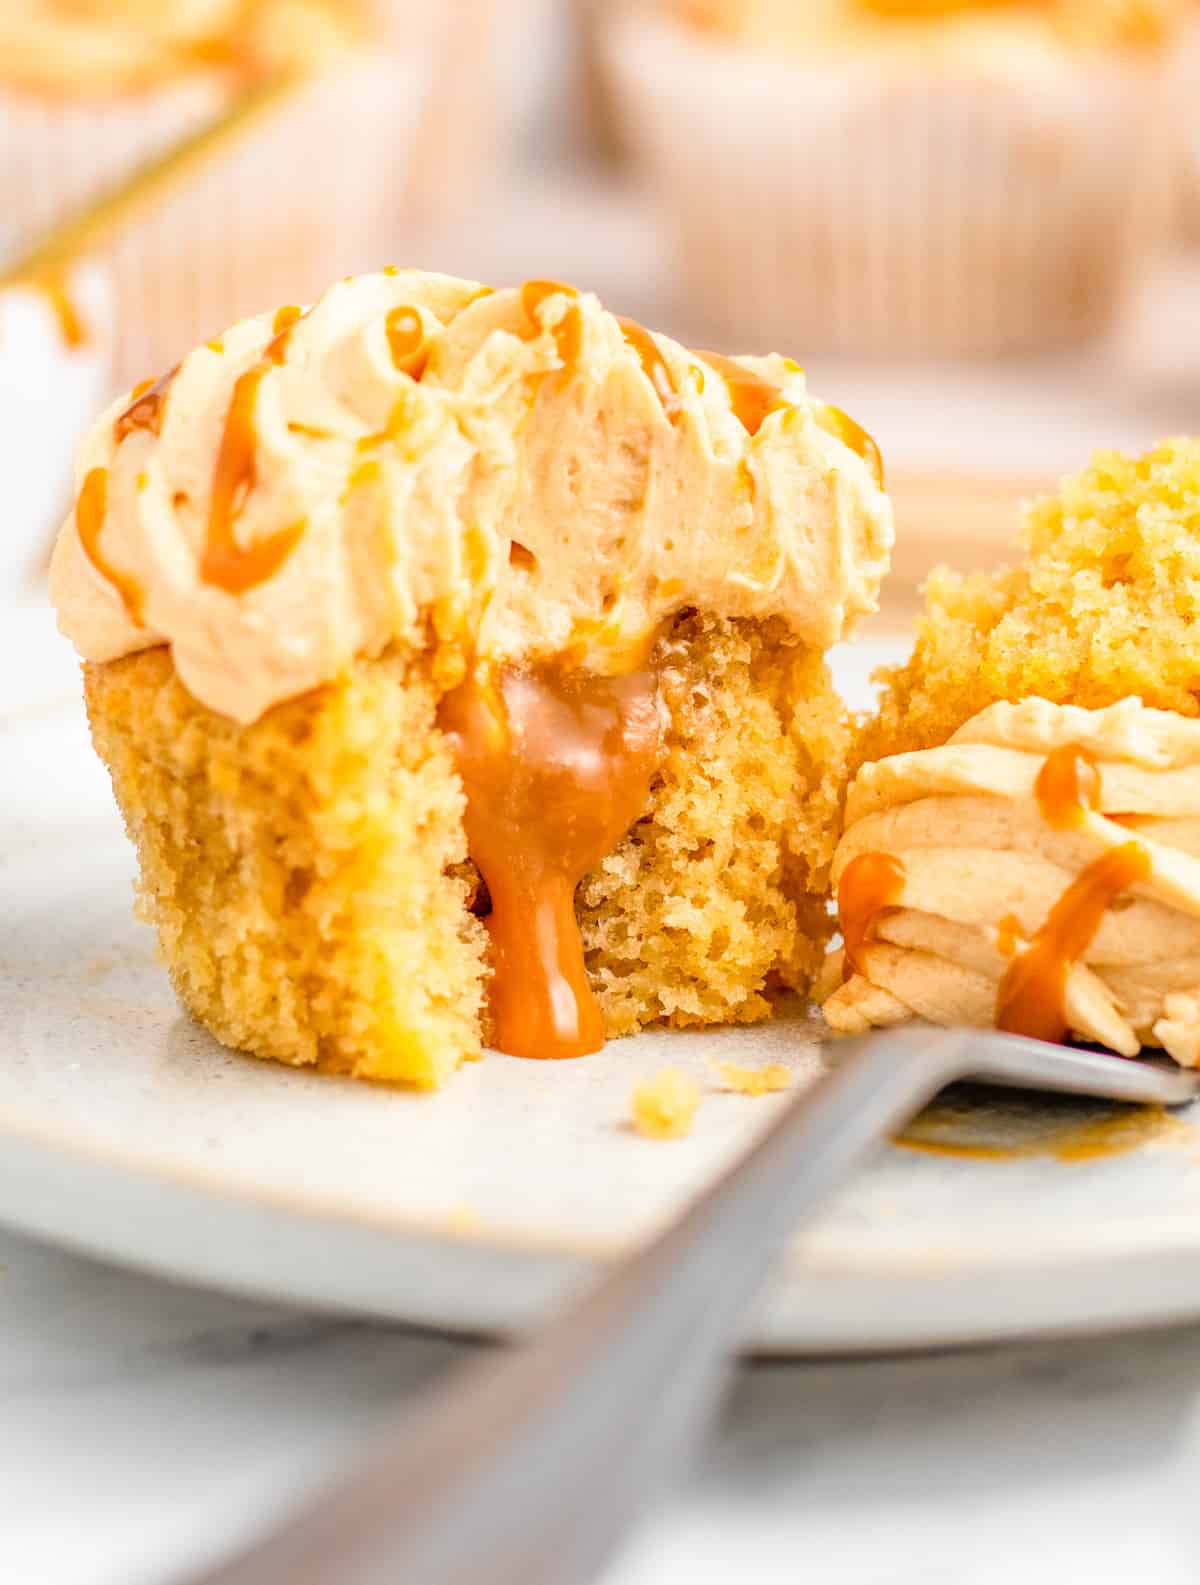 One Salted Caramel Cupcake on plate with a bite cut out showing the salted caramel center.